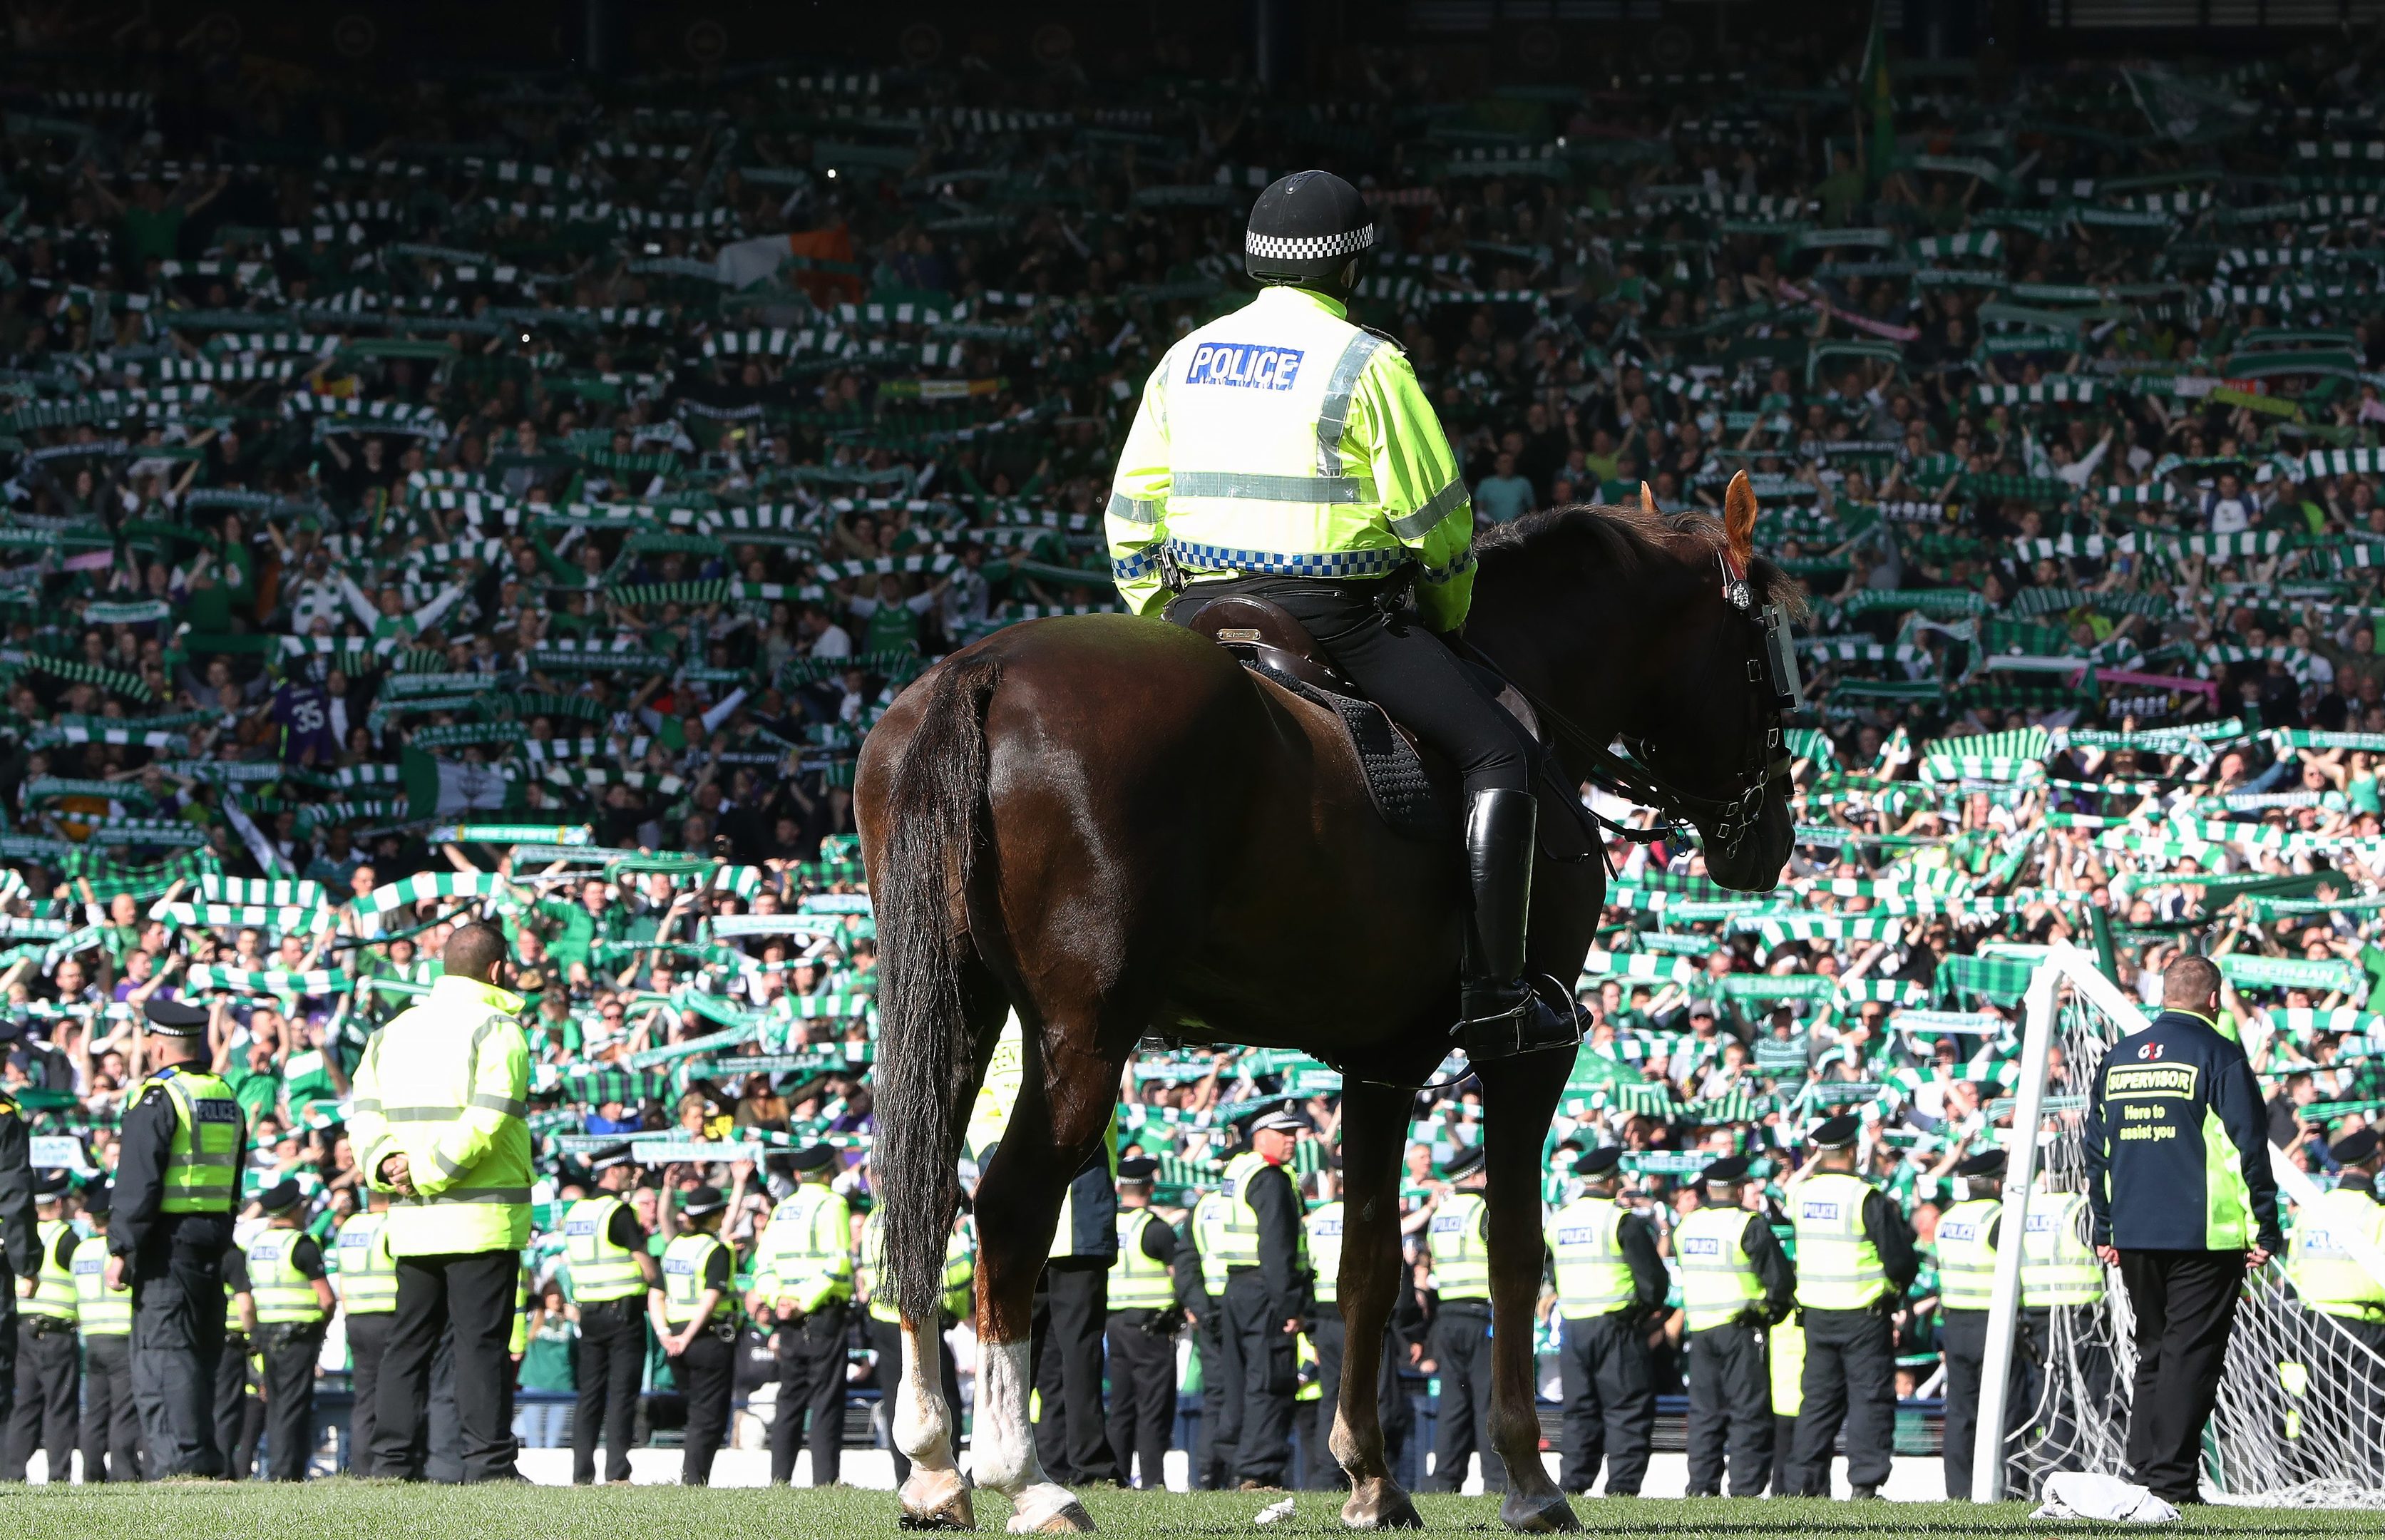 A mounted police officer looks on as Hibs fans celebrate during the Scottish Cup Final between Rangers and Hibernian at Hampden Park on May 21, 2016 in Glasgow.